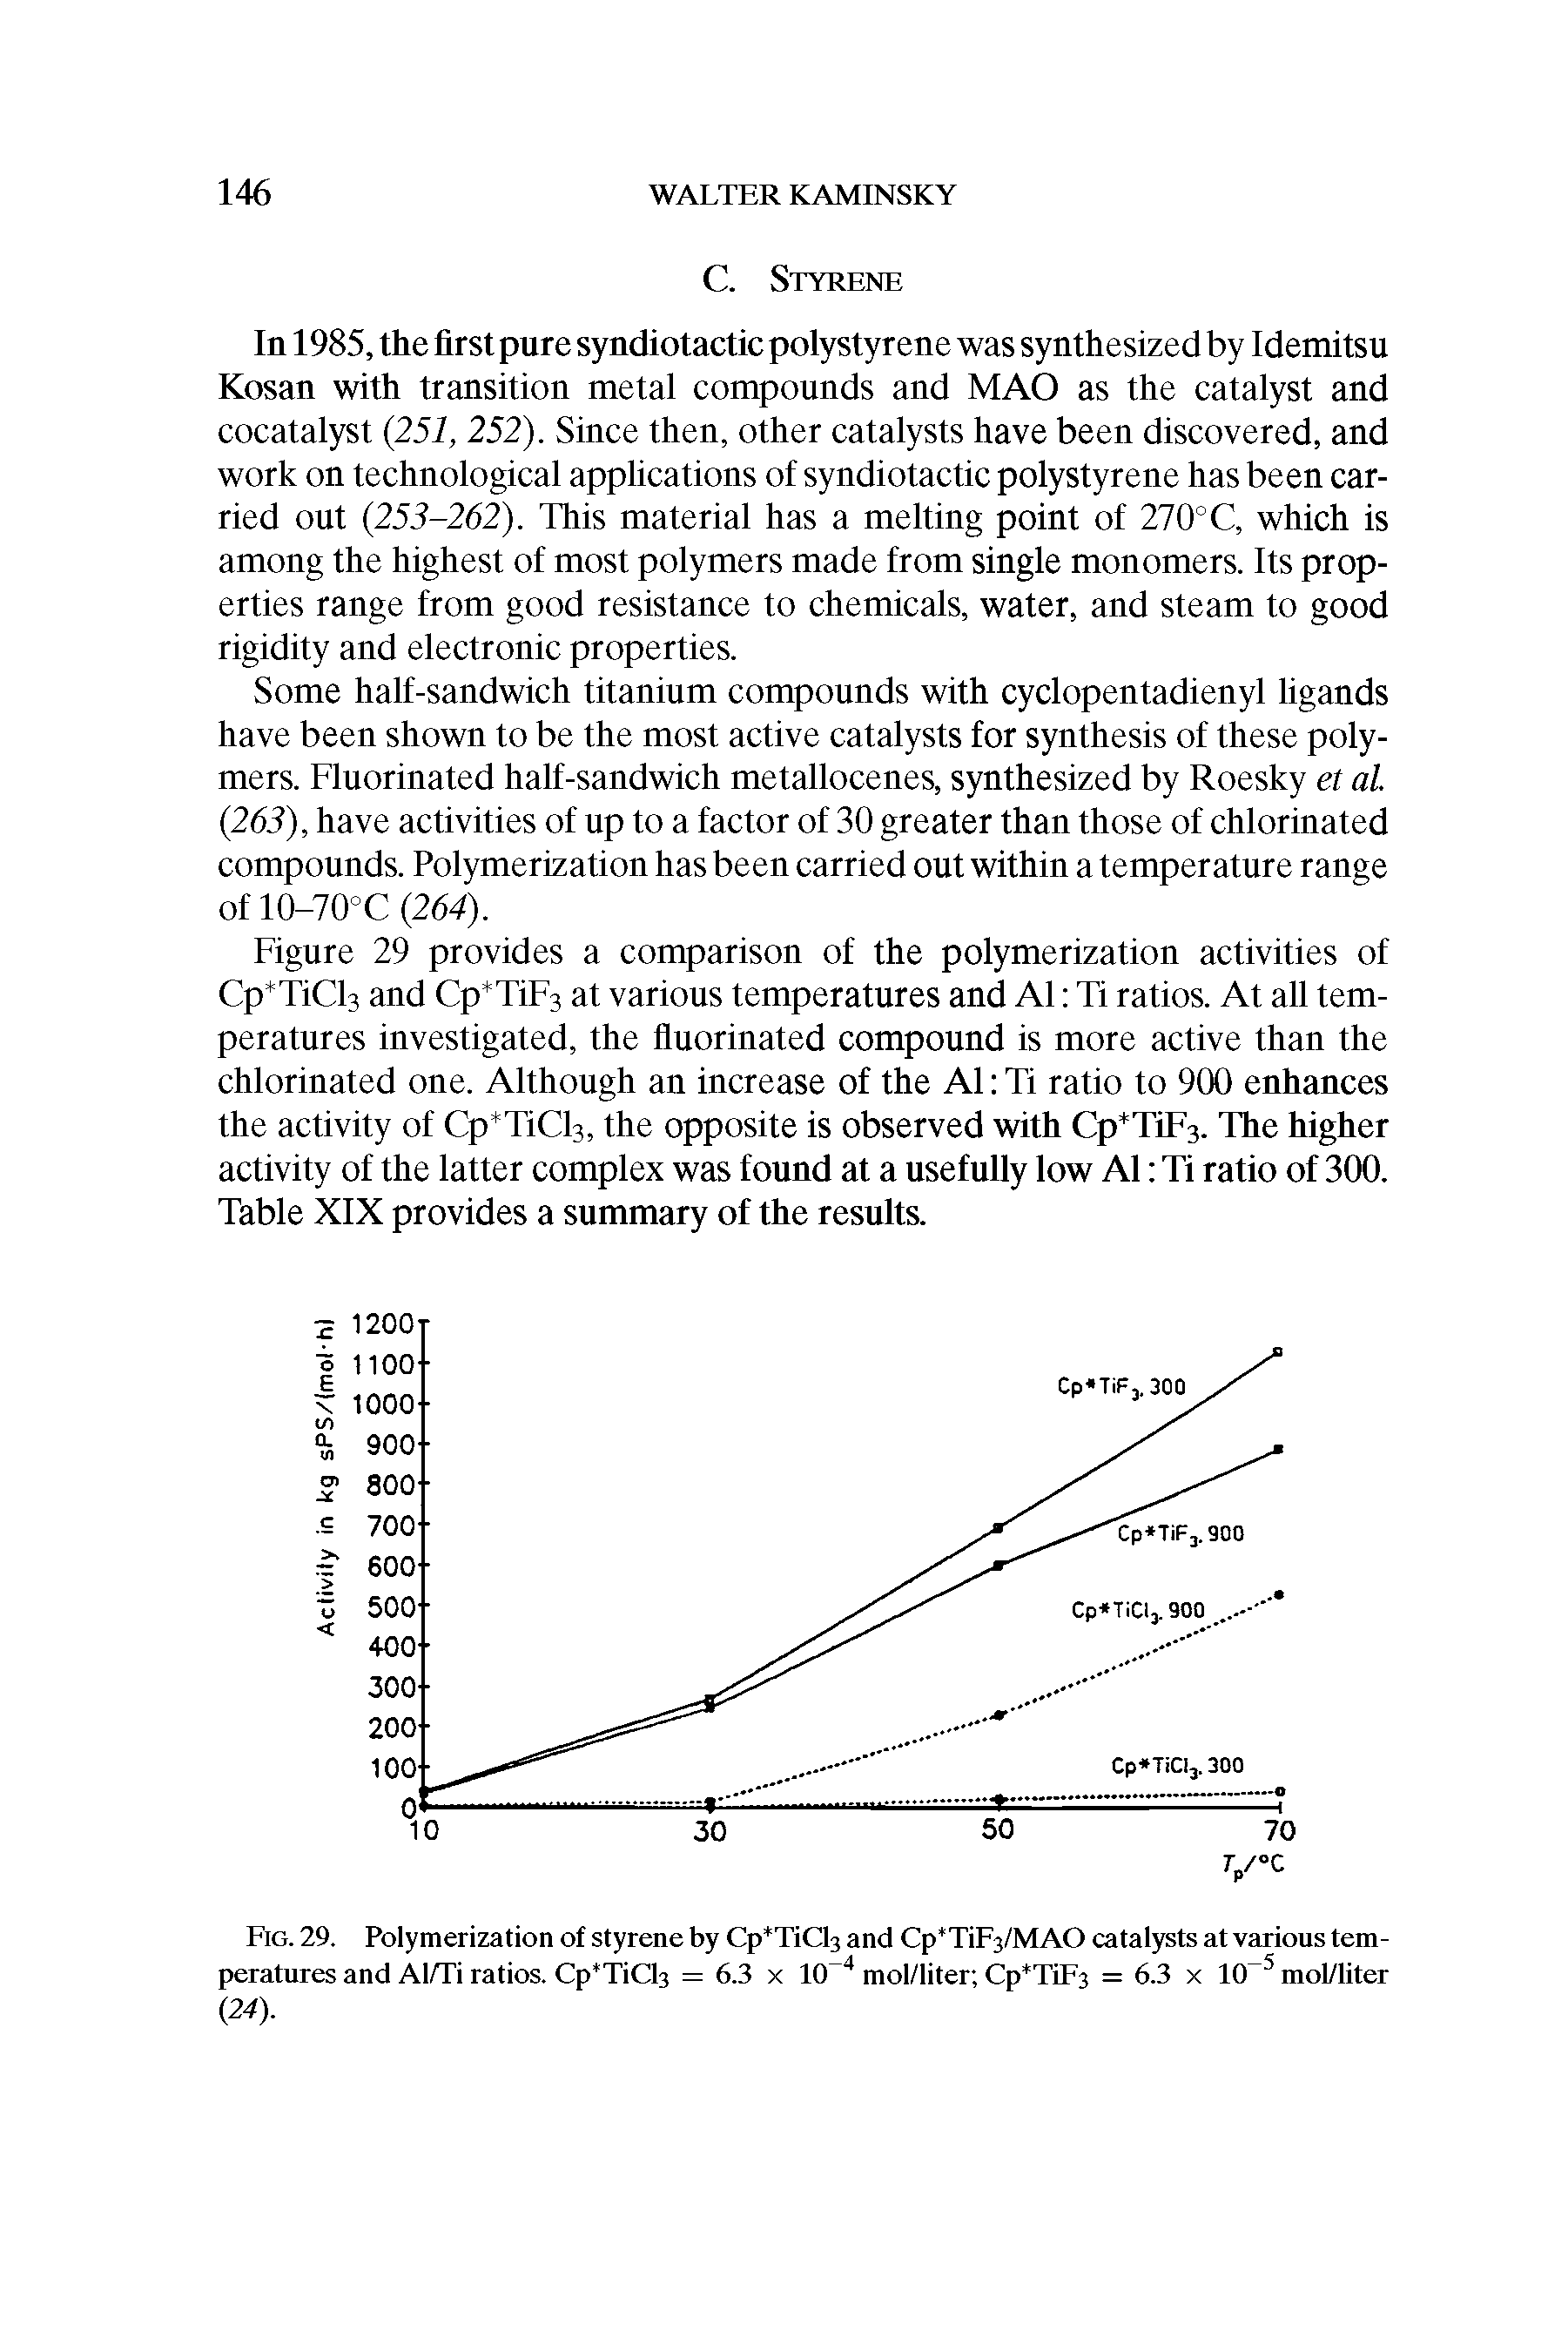 Fig. 29. Polymerization of styrene by Cp TiCl3 and Cp TiFj/MAO catalysts at various temperatures and Al/Ti ratios. Cp TiCl3 = 6.3 x 10 4 mol/liter Cp TiF3 = 6.3 x 10 5 mol/liter (24).